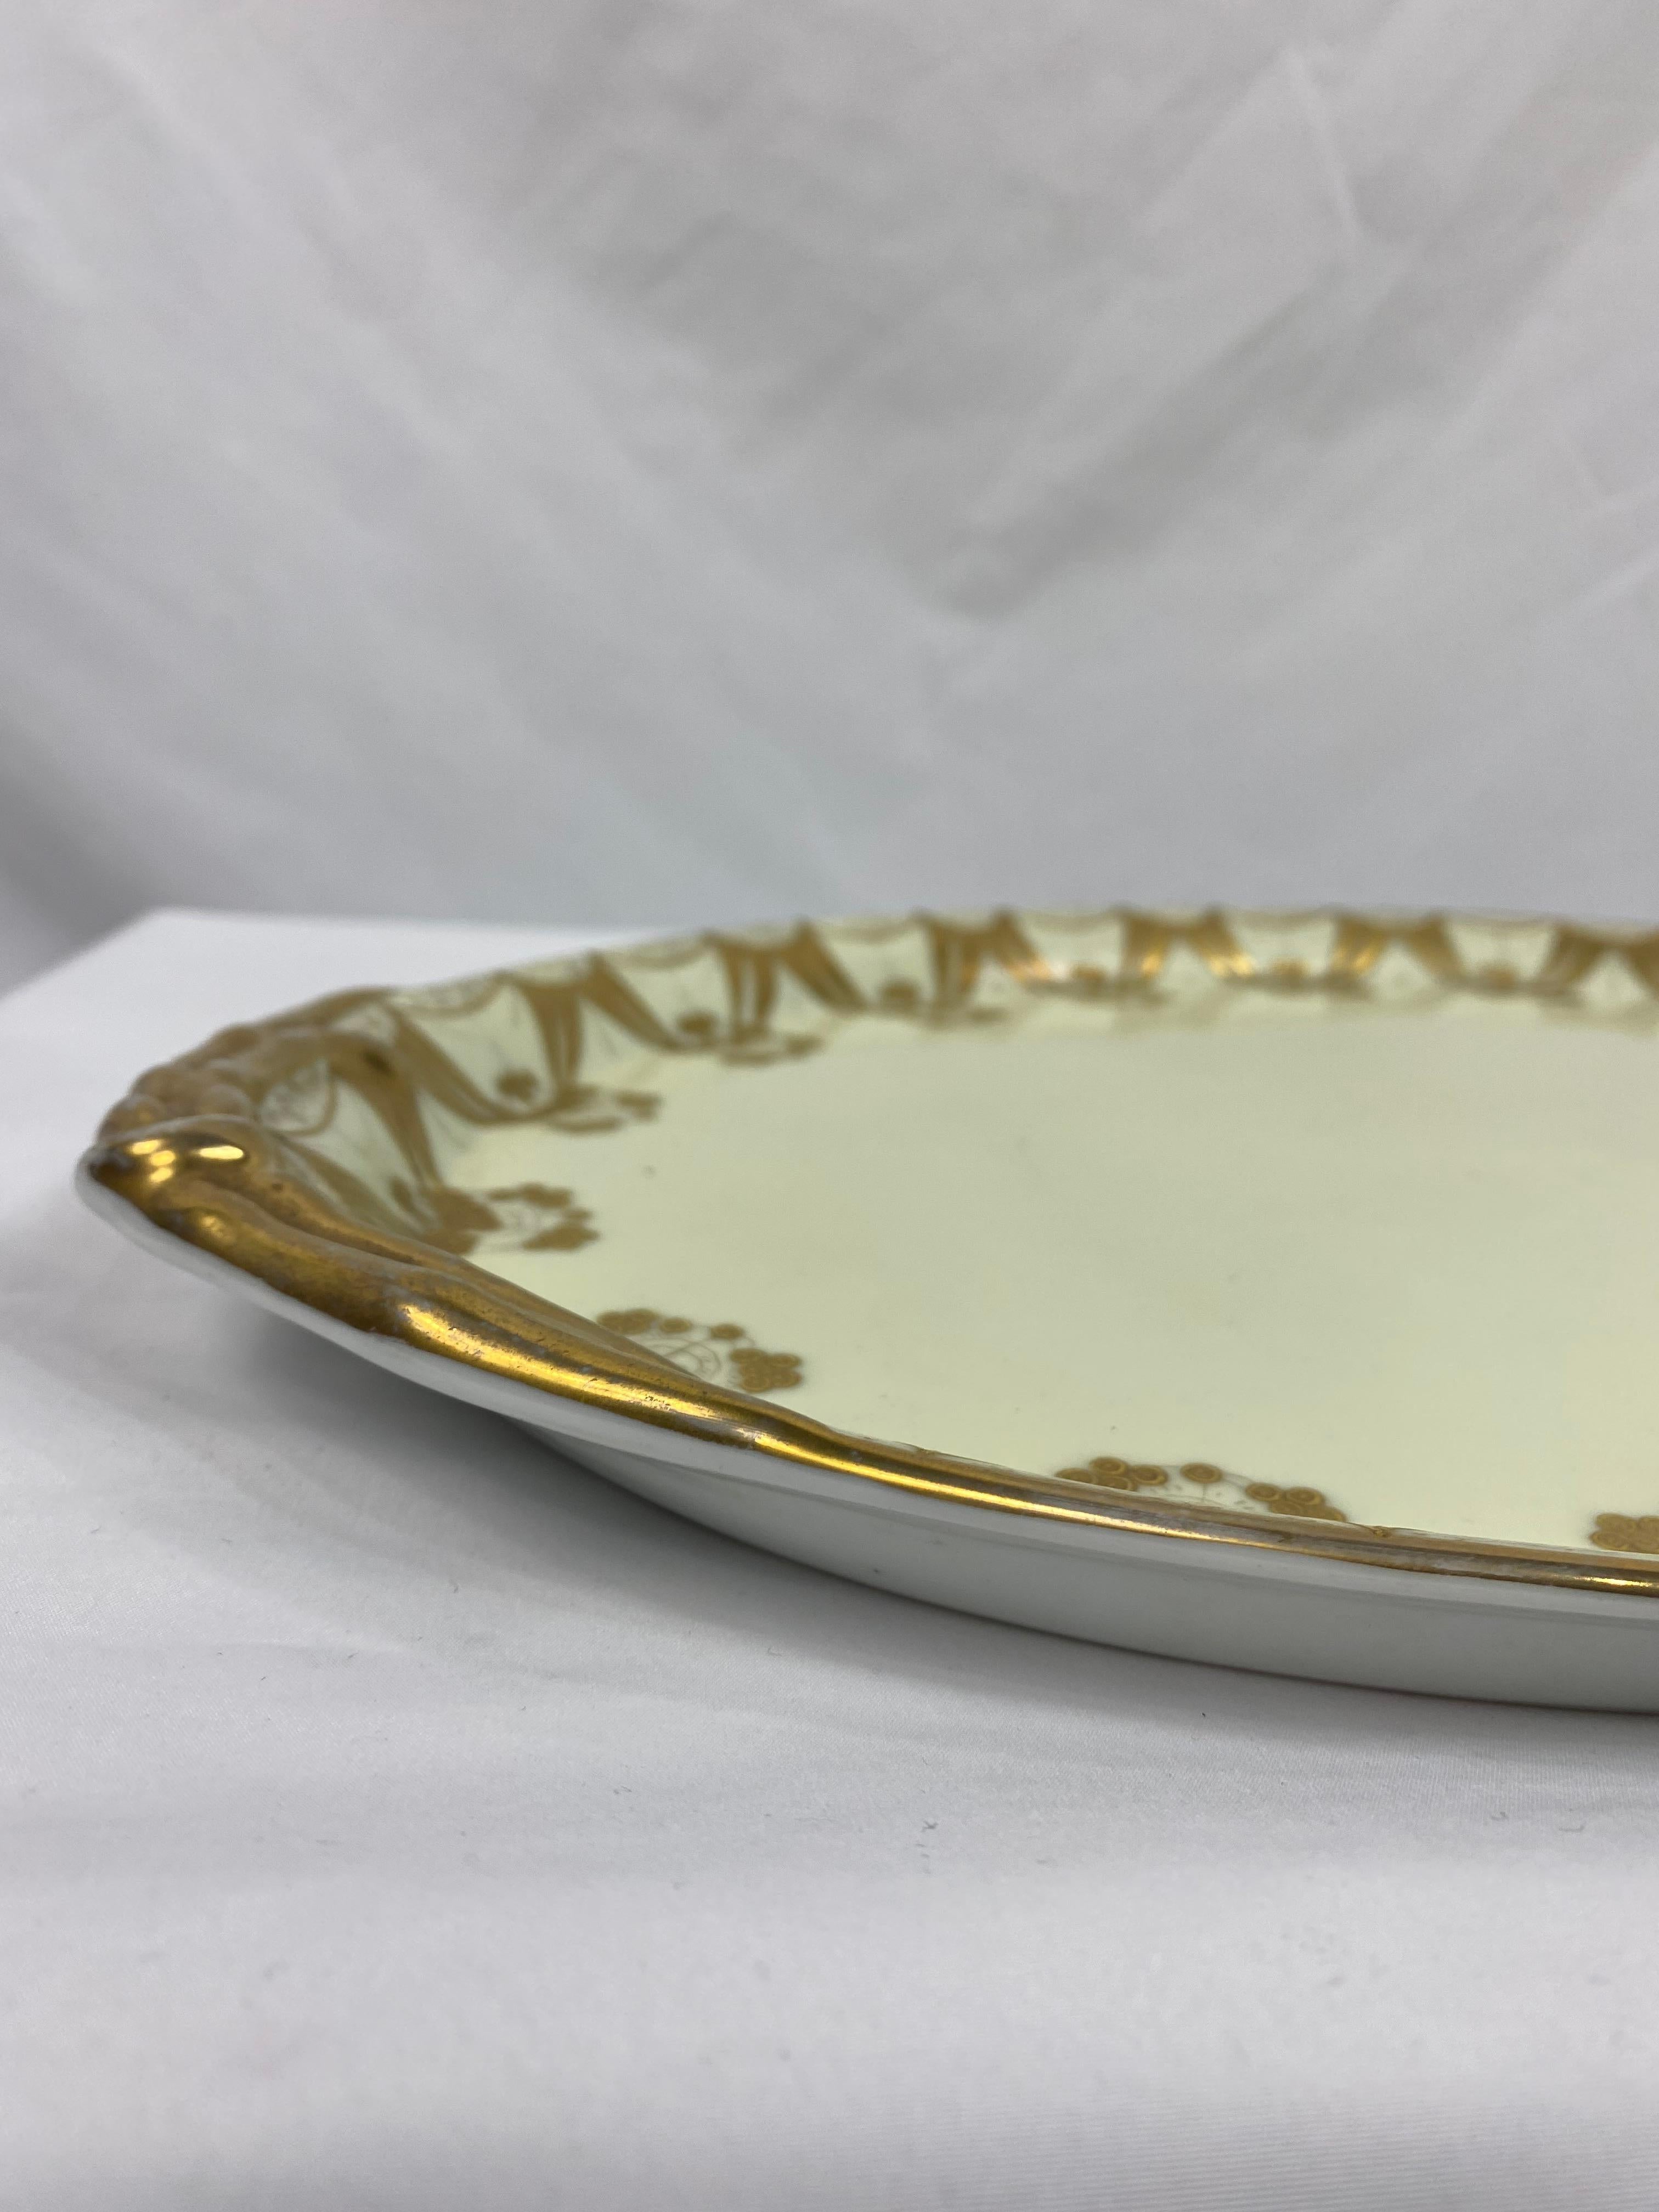 Product details:

Gardner was a very famous manufacturer that made porcelain pieces for the royalty and elite of Russia.   
The tray is made of porcelain. It features hand painted ornaments done with gold leaf. This is used as a serving platter for